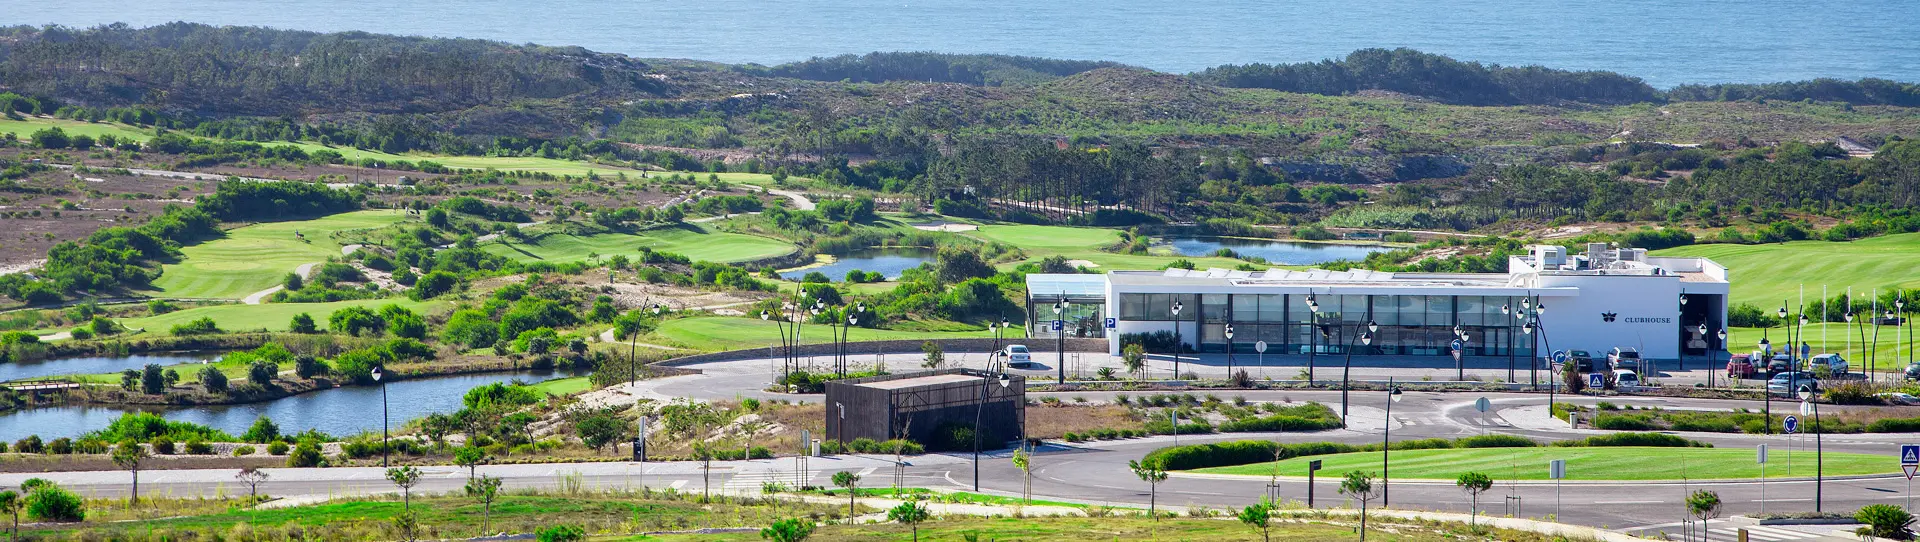 Portugal golf holidays - 7 Nights BB & 5 Golf Rounds - Photo 3